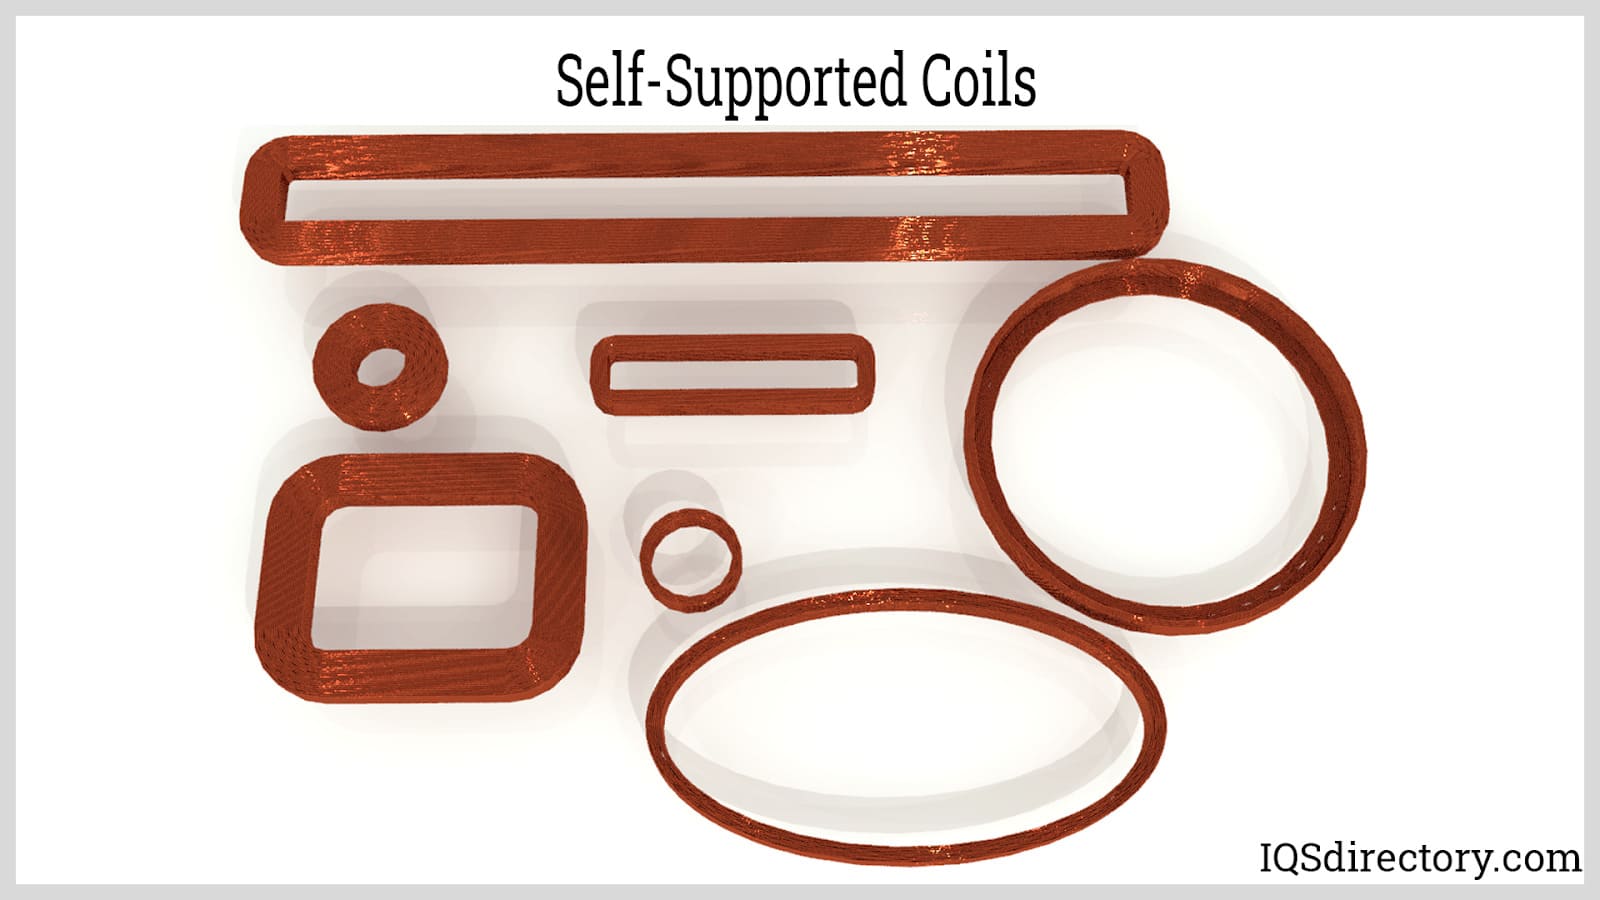 Self-Supported Coils